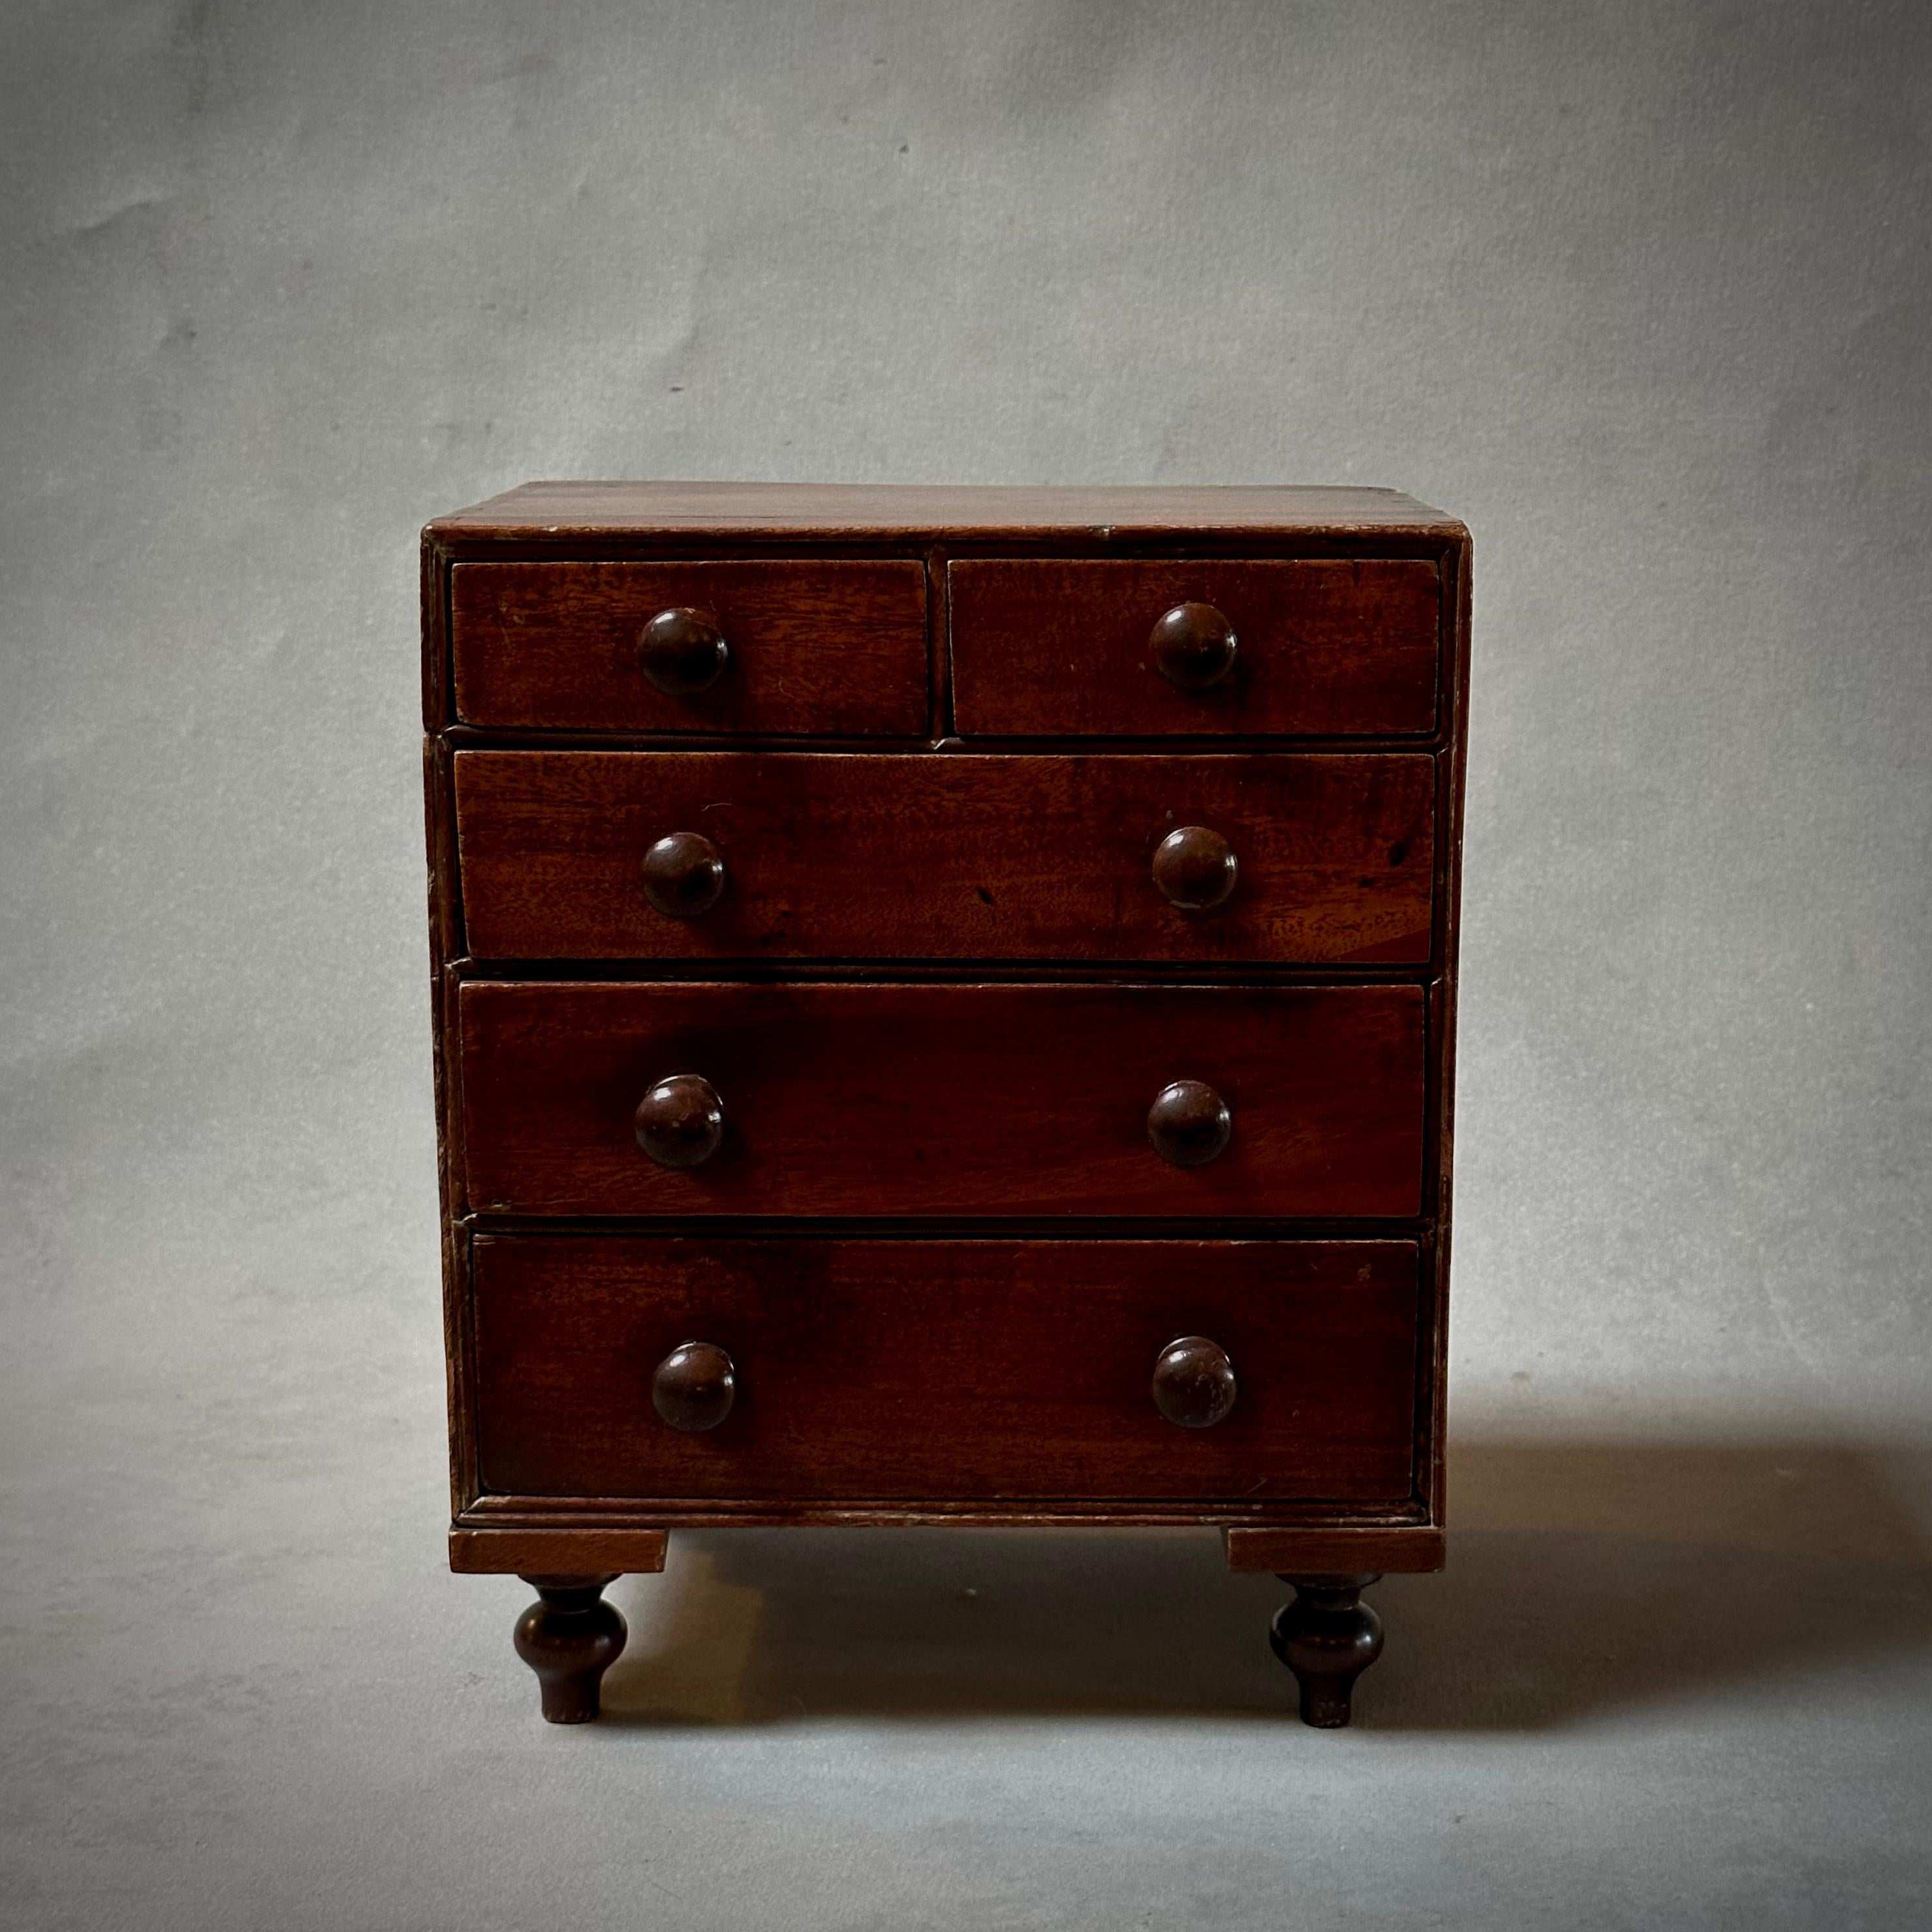 1860s English mahogany tabletop chest of drawers. Perfect for organizing jewelry or desktop materials, this unique box or storage vessel adds a touch of traditional charm to any space. 

England, circa 1860

Dimensions: 9 W x 8 D x 11 H.